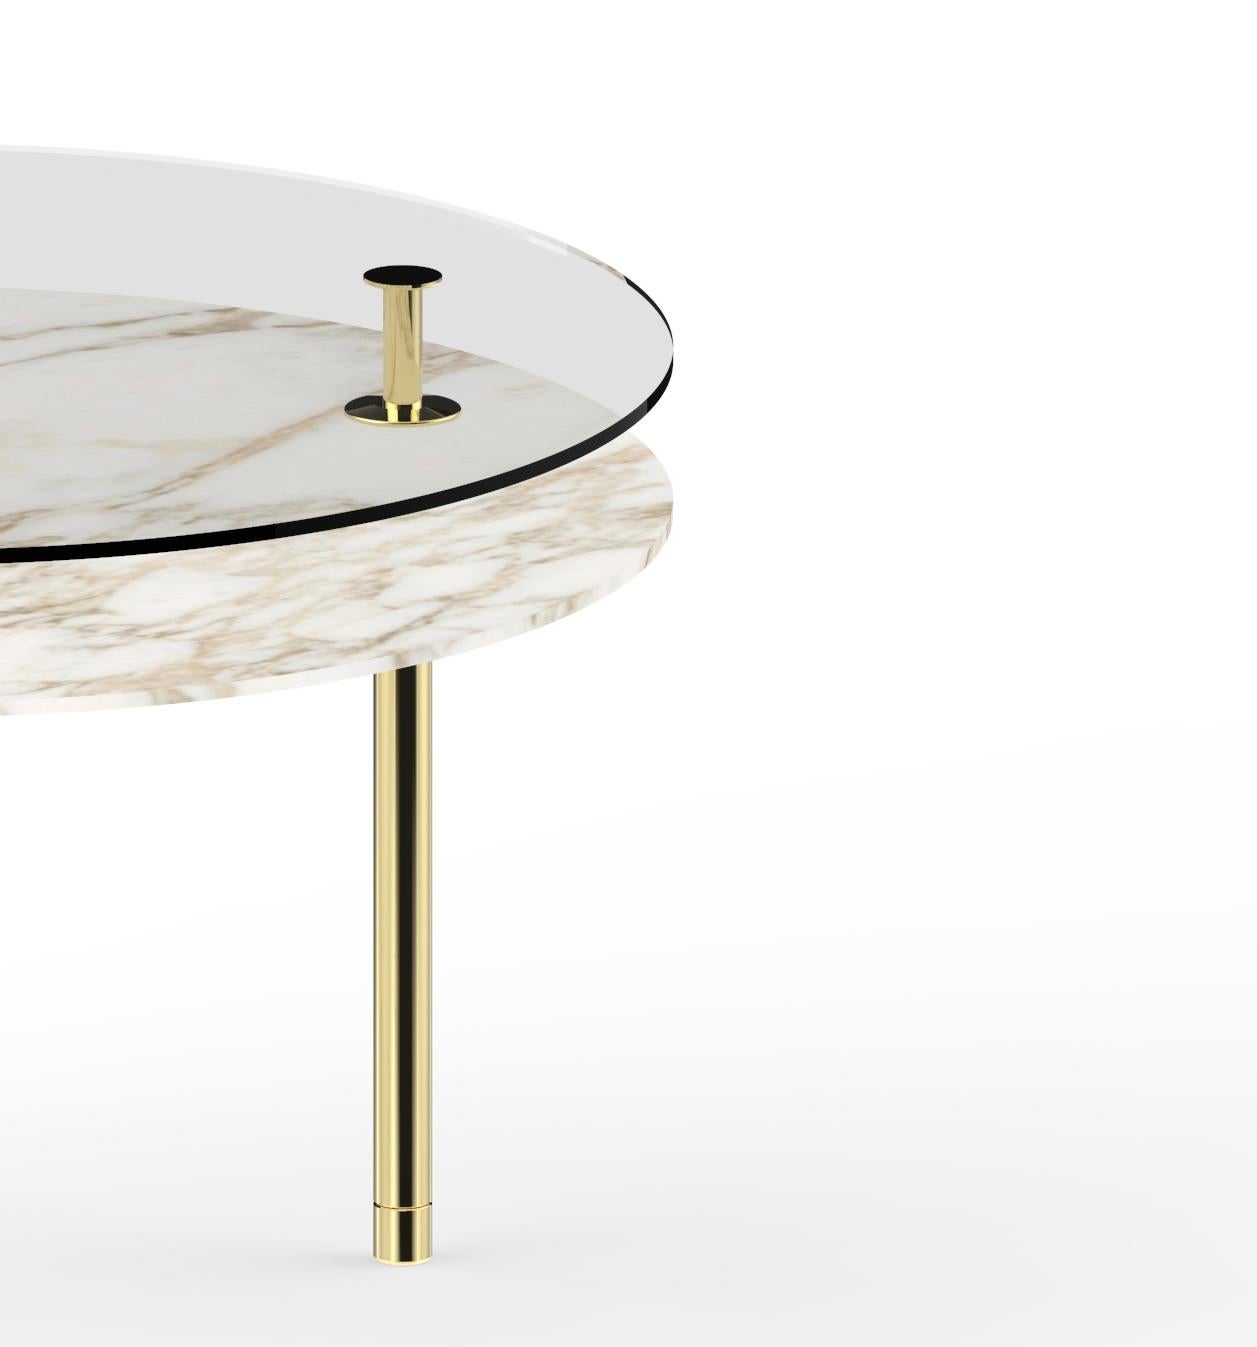 Gold (Polished Brass) Ghidini 1961 Legs Round Dining Table with Calacatta Gold Marble Top 3